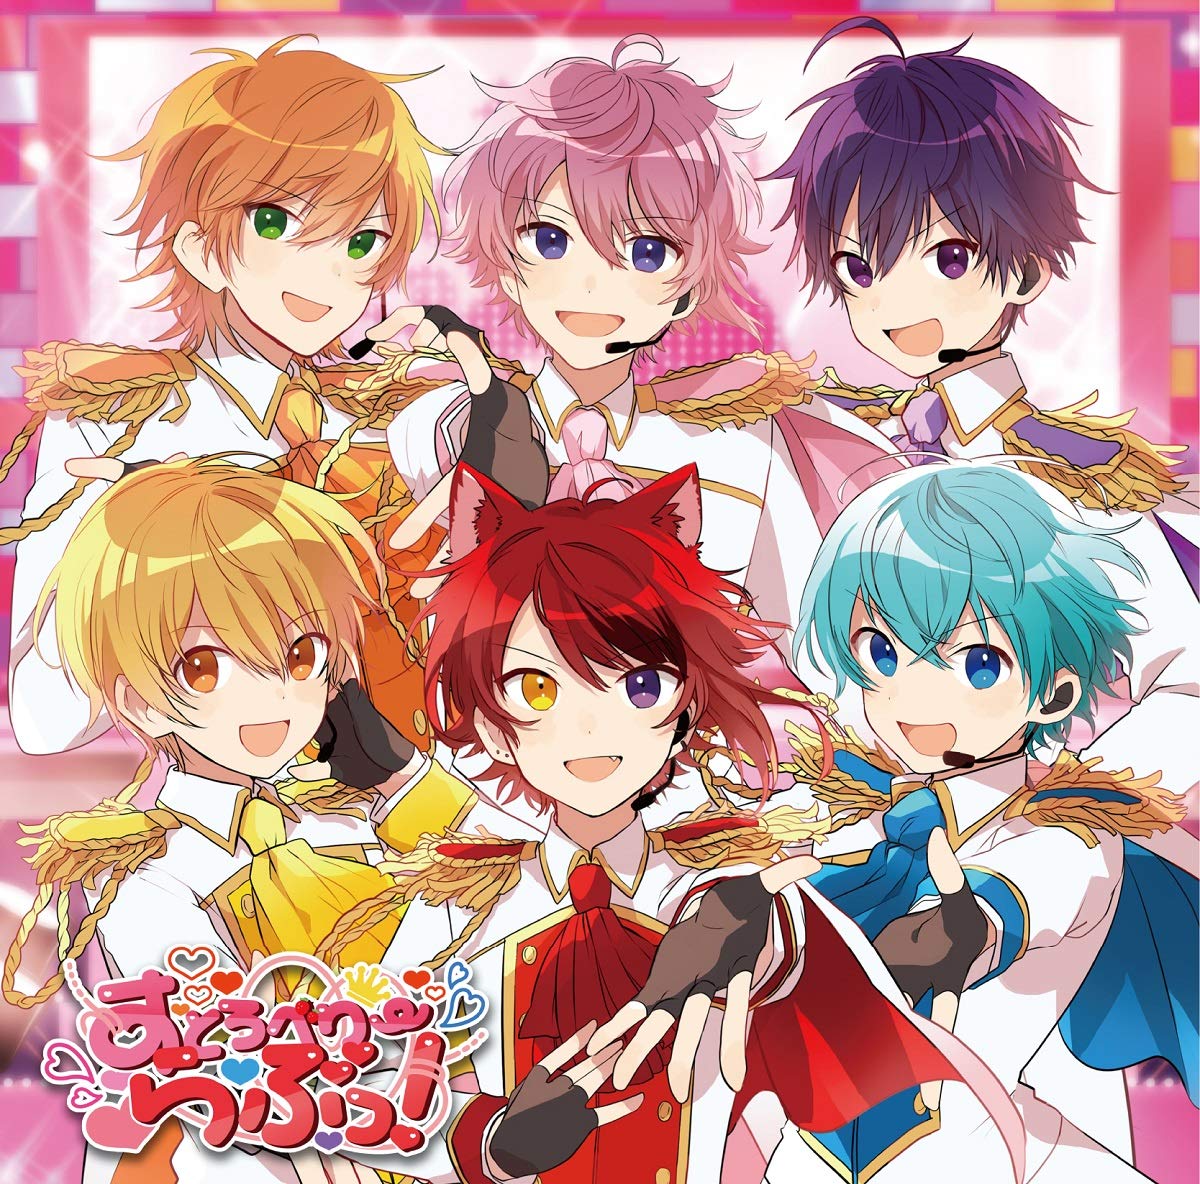 Cover for『Strawberry Prince - No Perfect』from the release『Strawberry Love!』